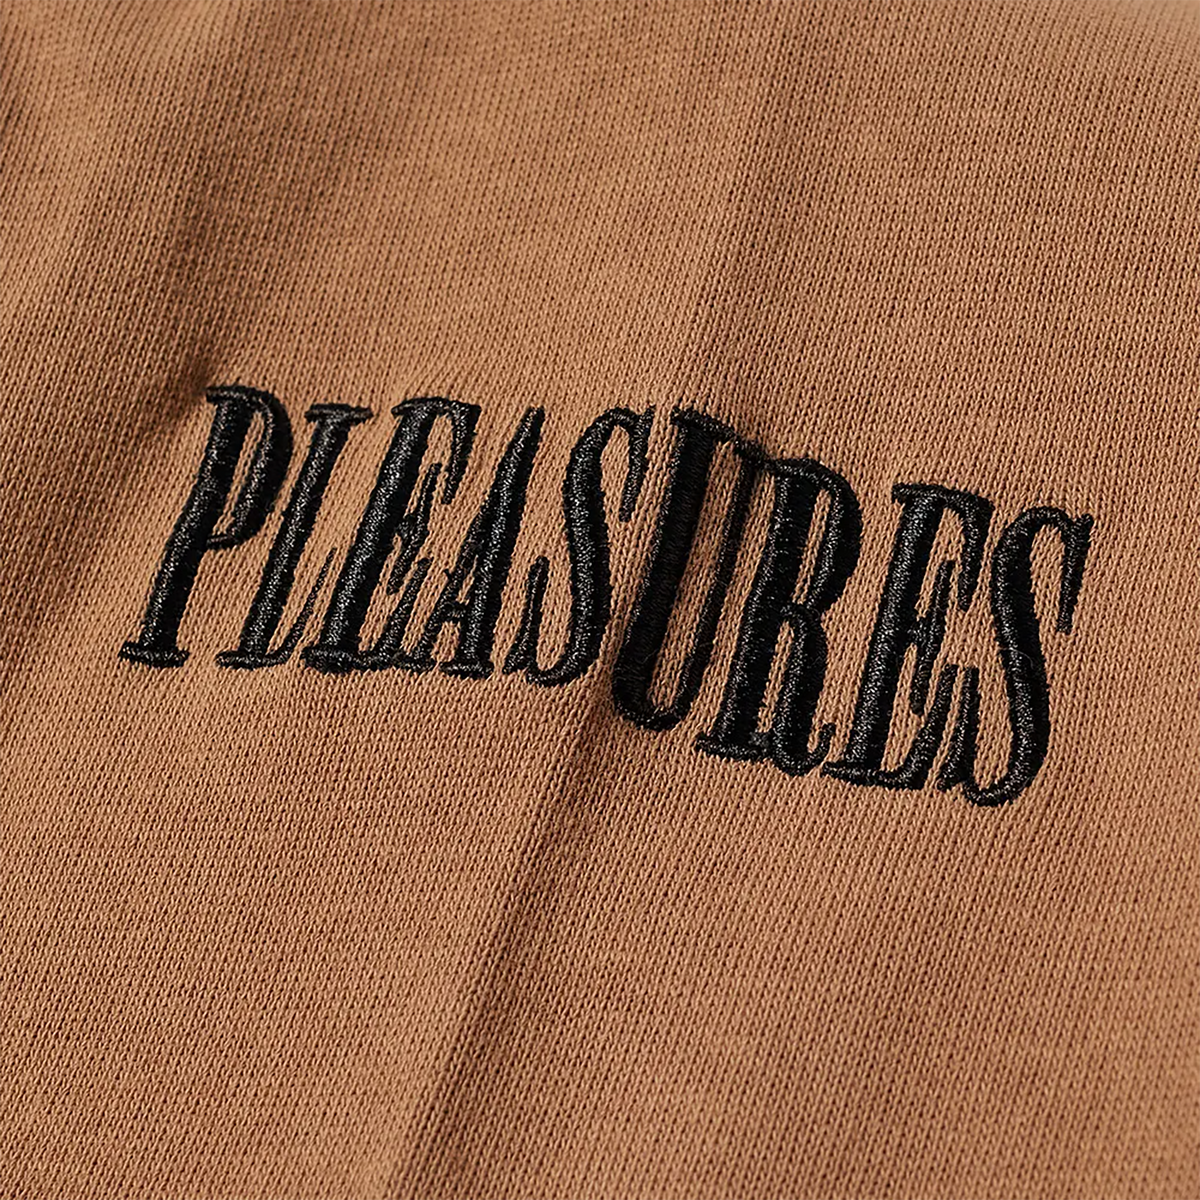 PLEASURES VICES KNIT LONG SLEEVE